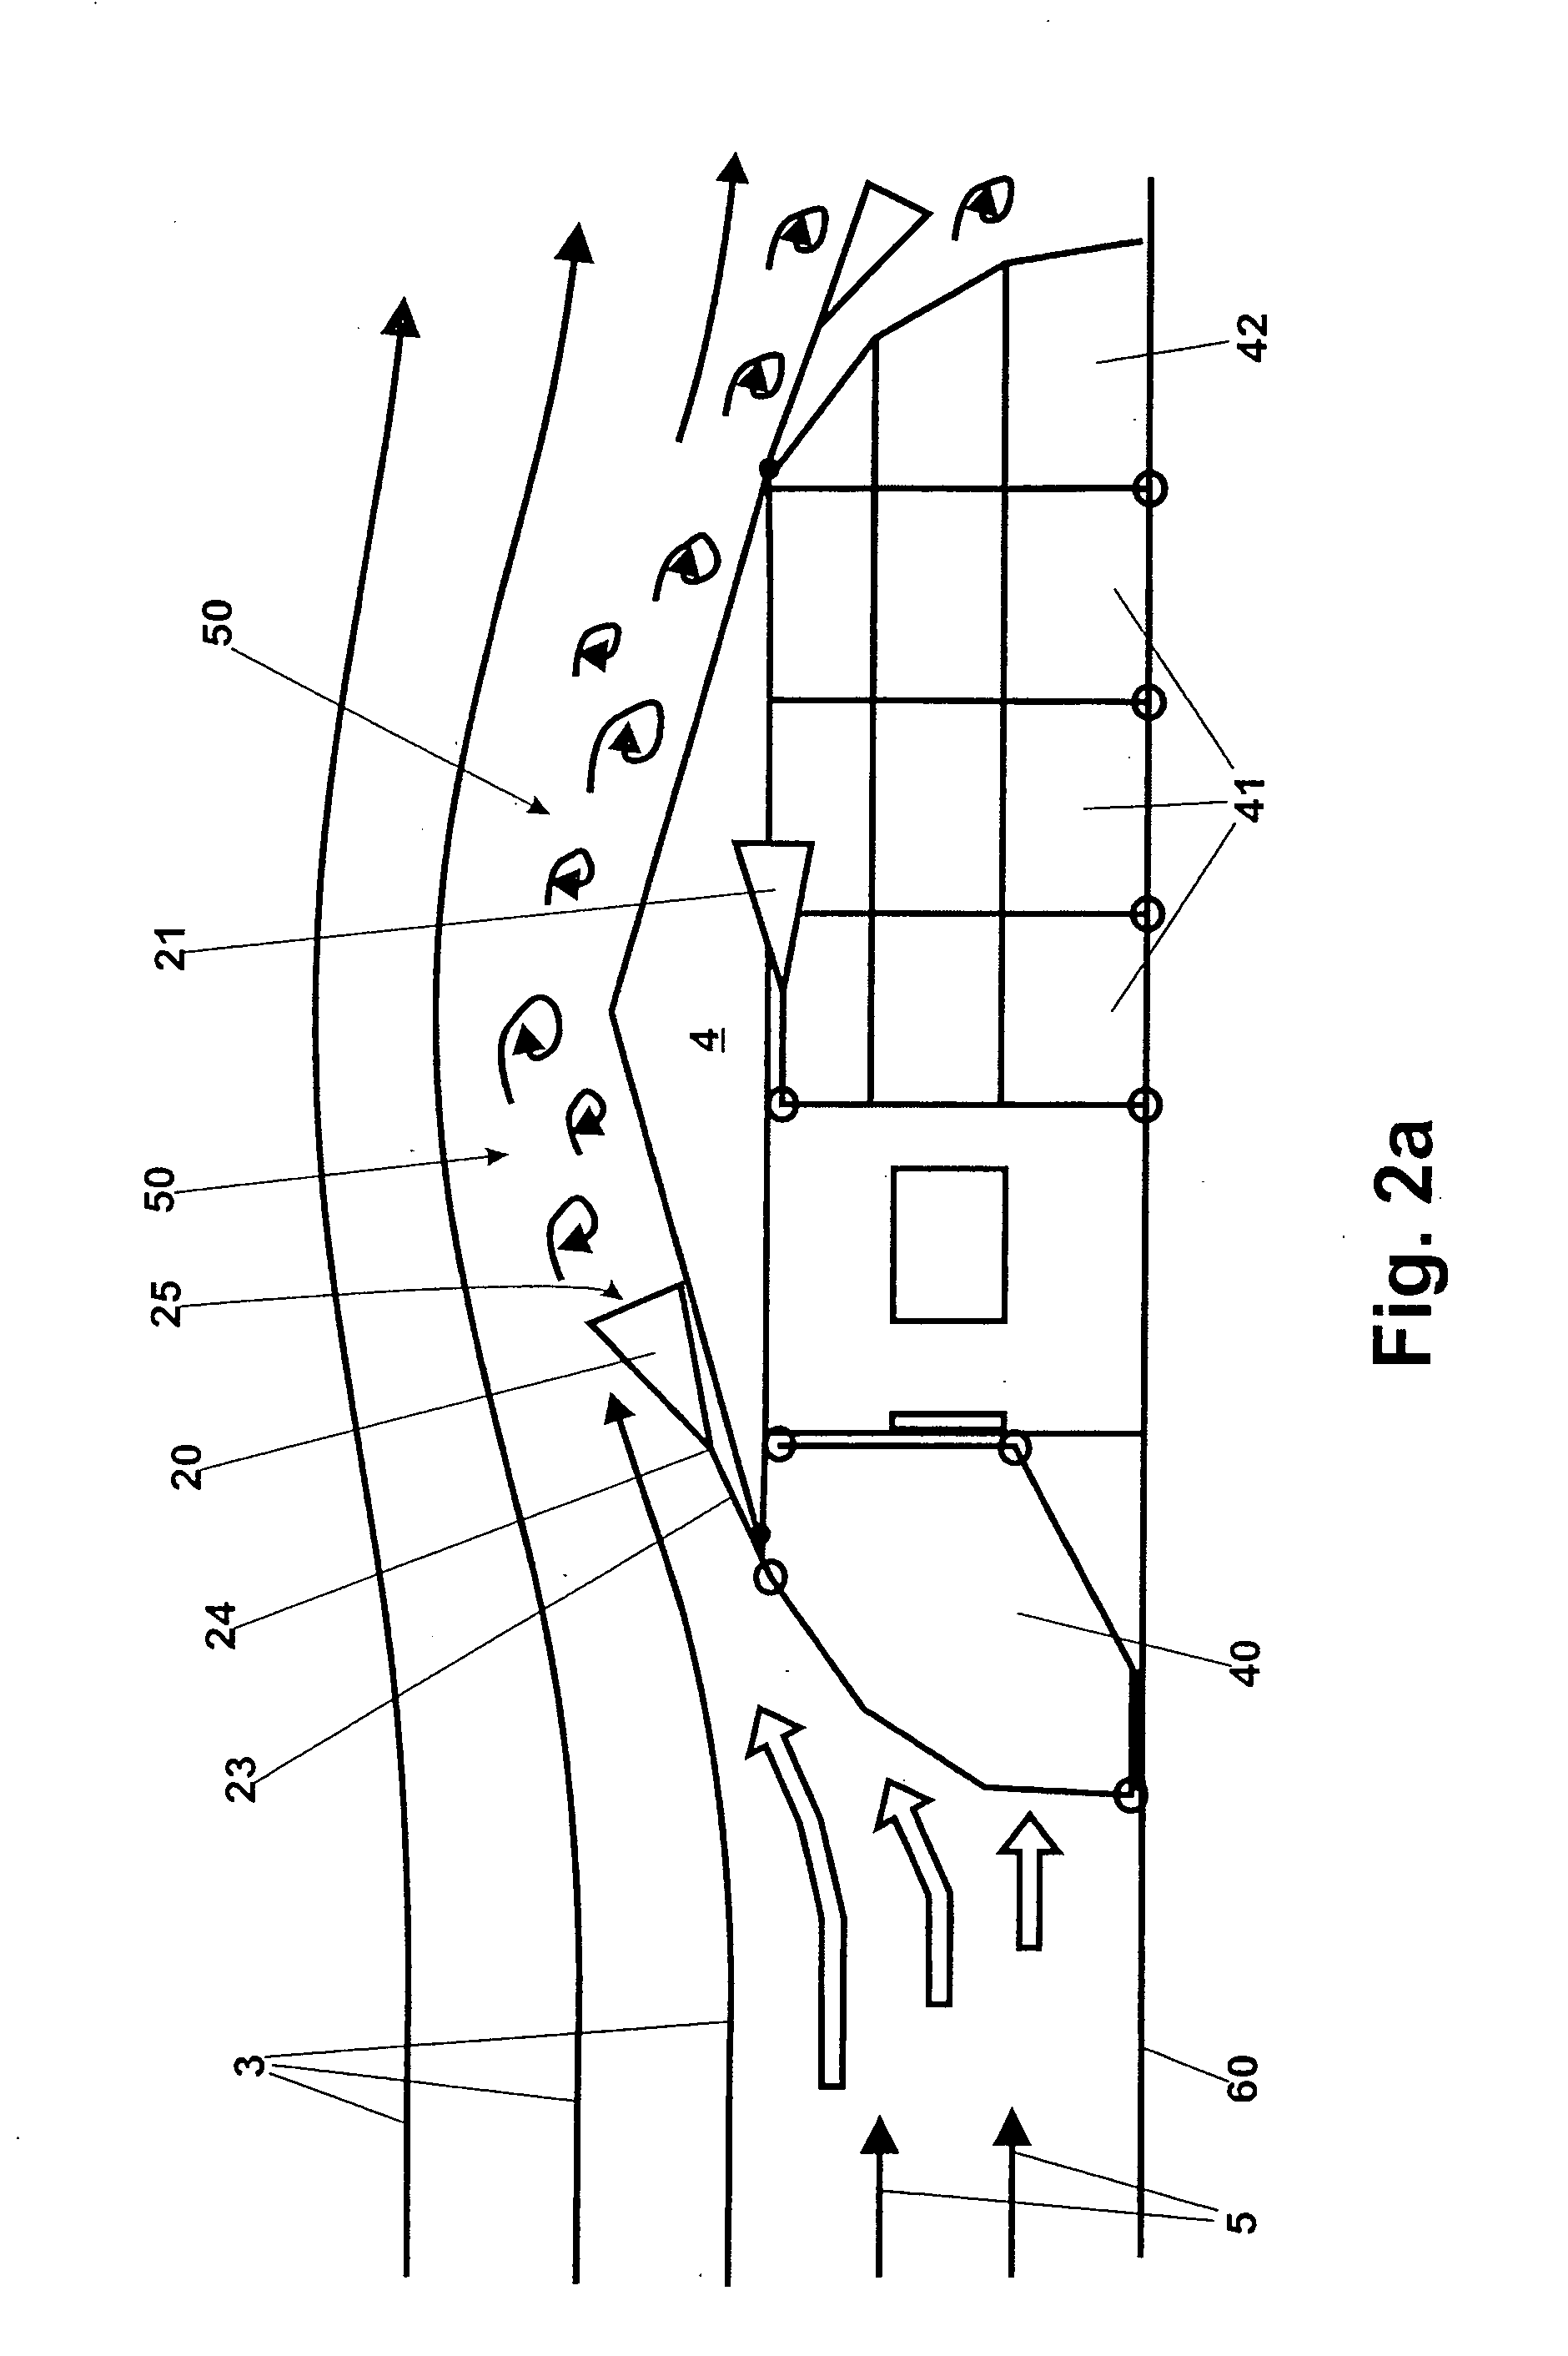 Wind flow body for a structure and method of use thereof